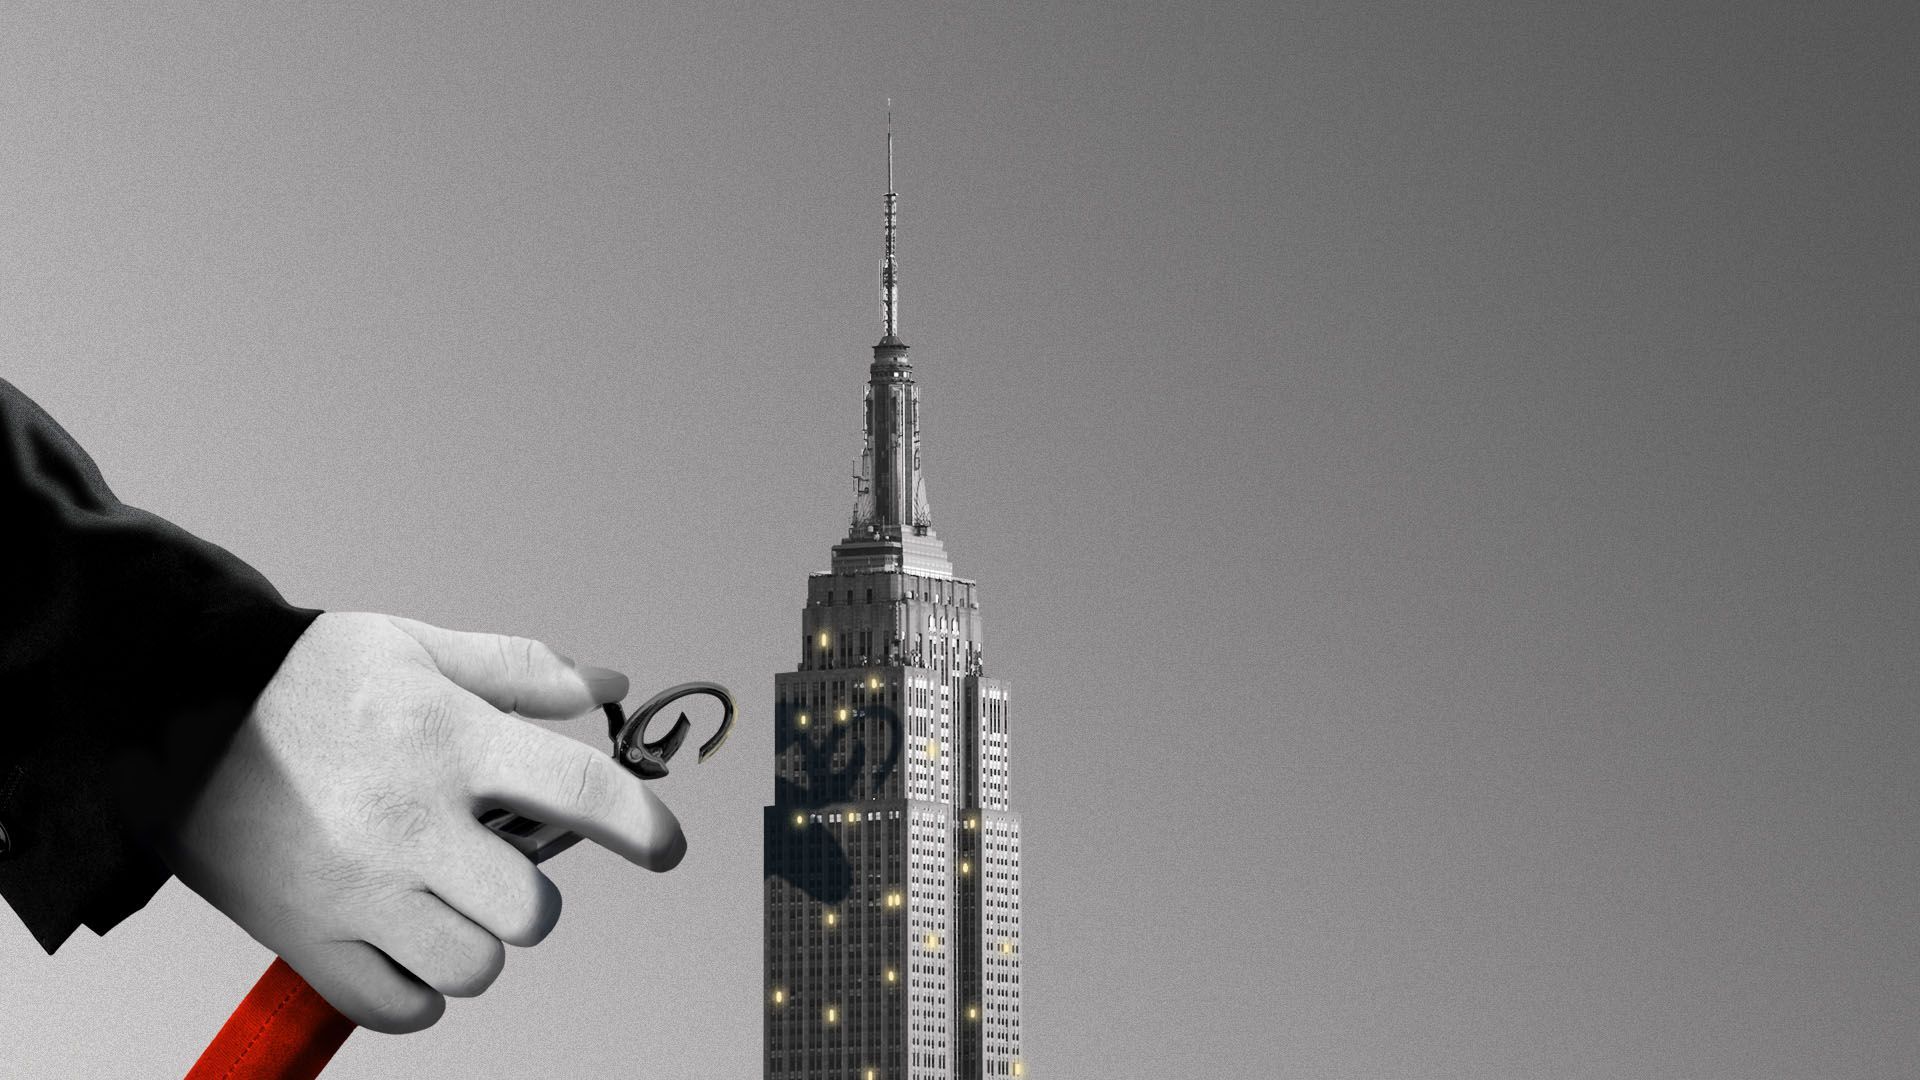 Illustration of a hand about to close a velvet rope on the Empire State Building